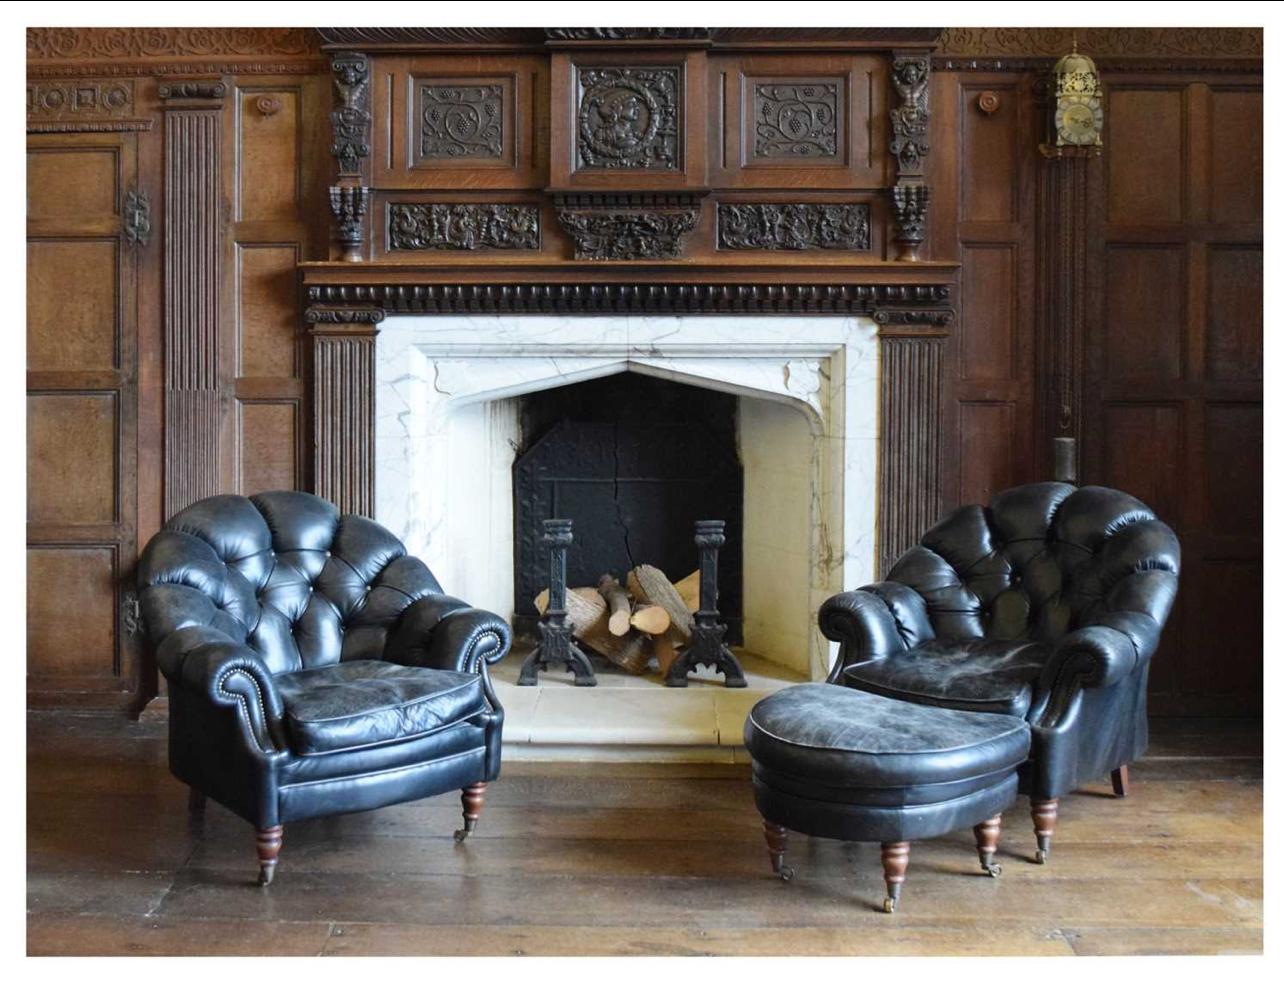 A beautiful set of sofas and armchairs from Barrow Court House in Somerset, England.
Barrow Court is a manor house in Barrow Gurney, Somerset, England. The site was originally Barrow Gurney Nunnery, which was rebuilt in the 16th and 19th centuries.